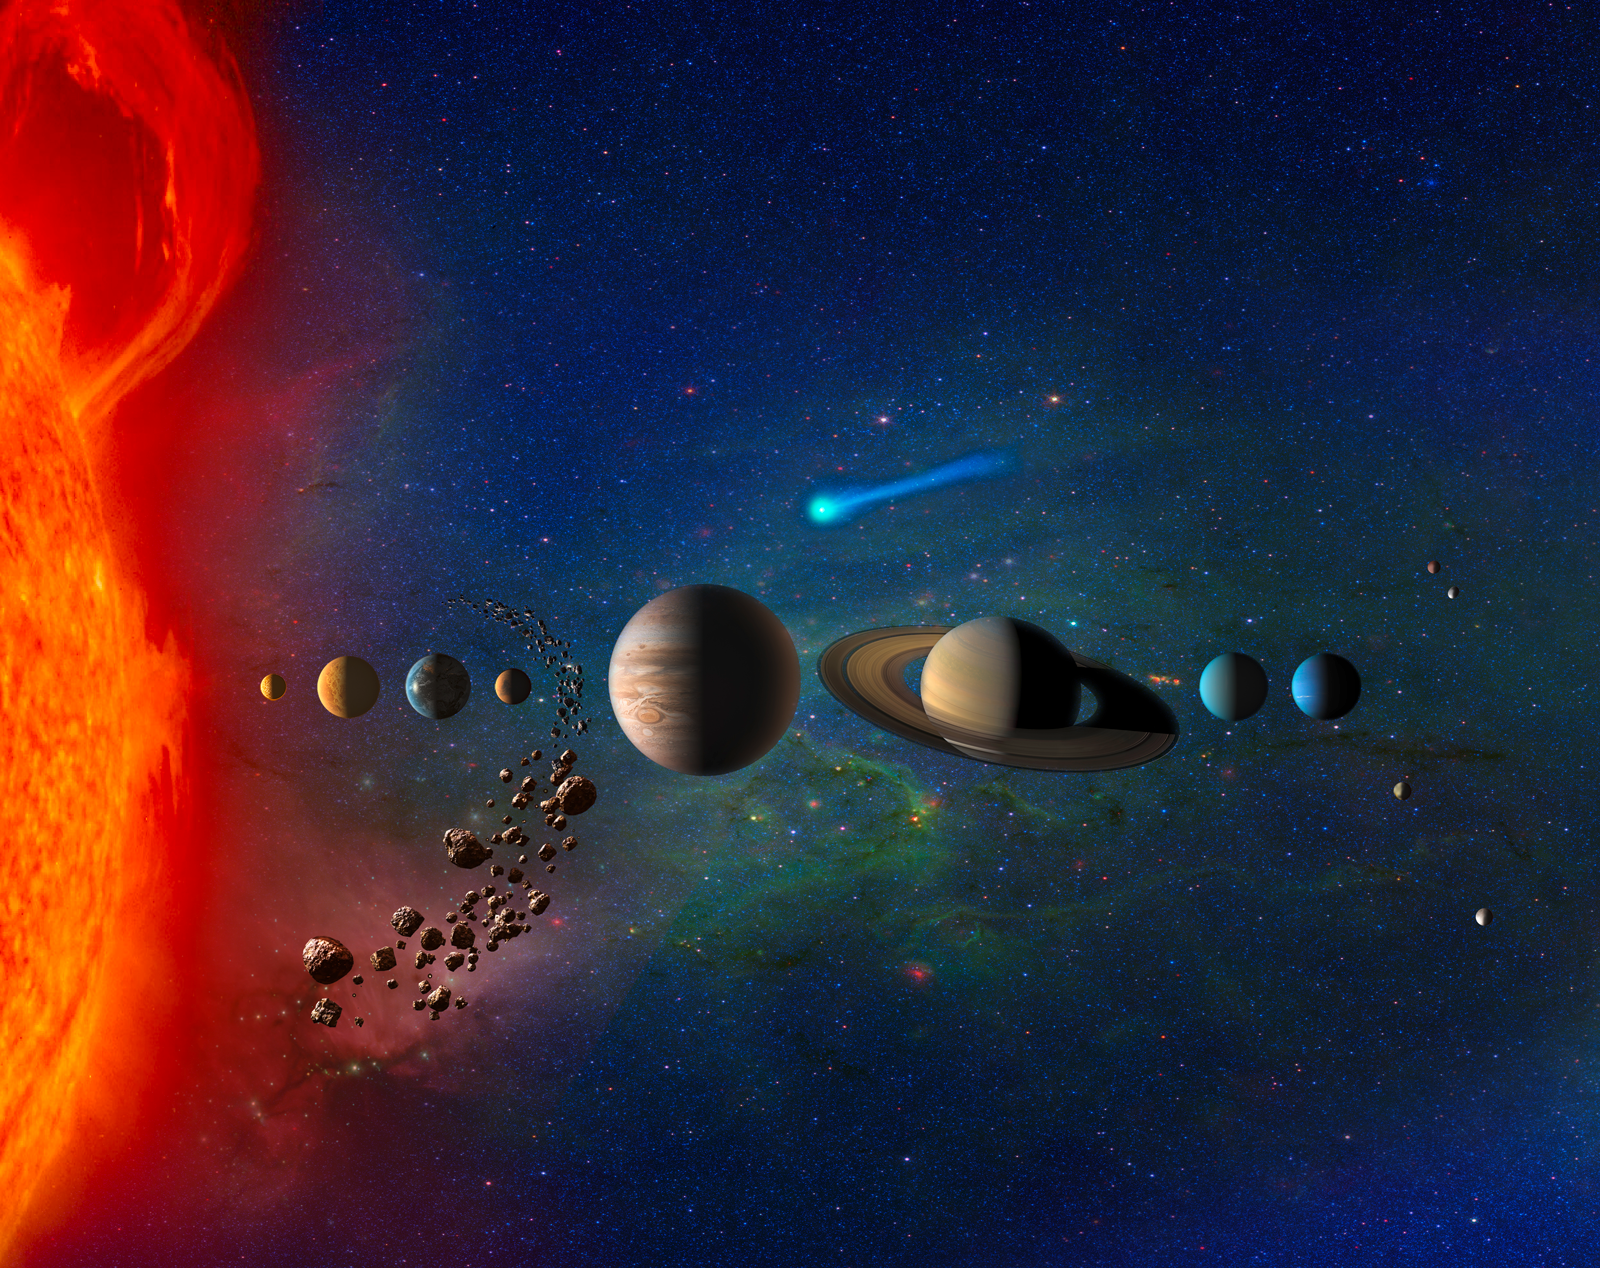 Artist's rendering of the planets in our solar system, with the Sun at left.